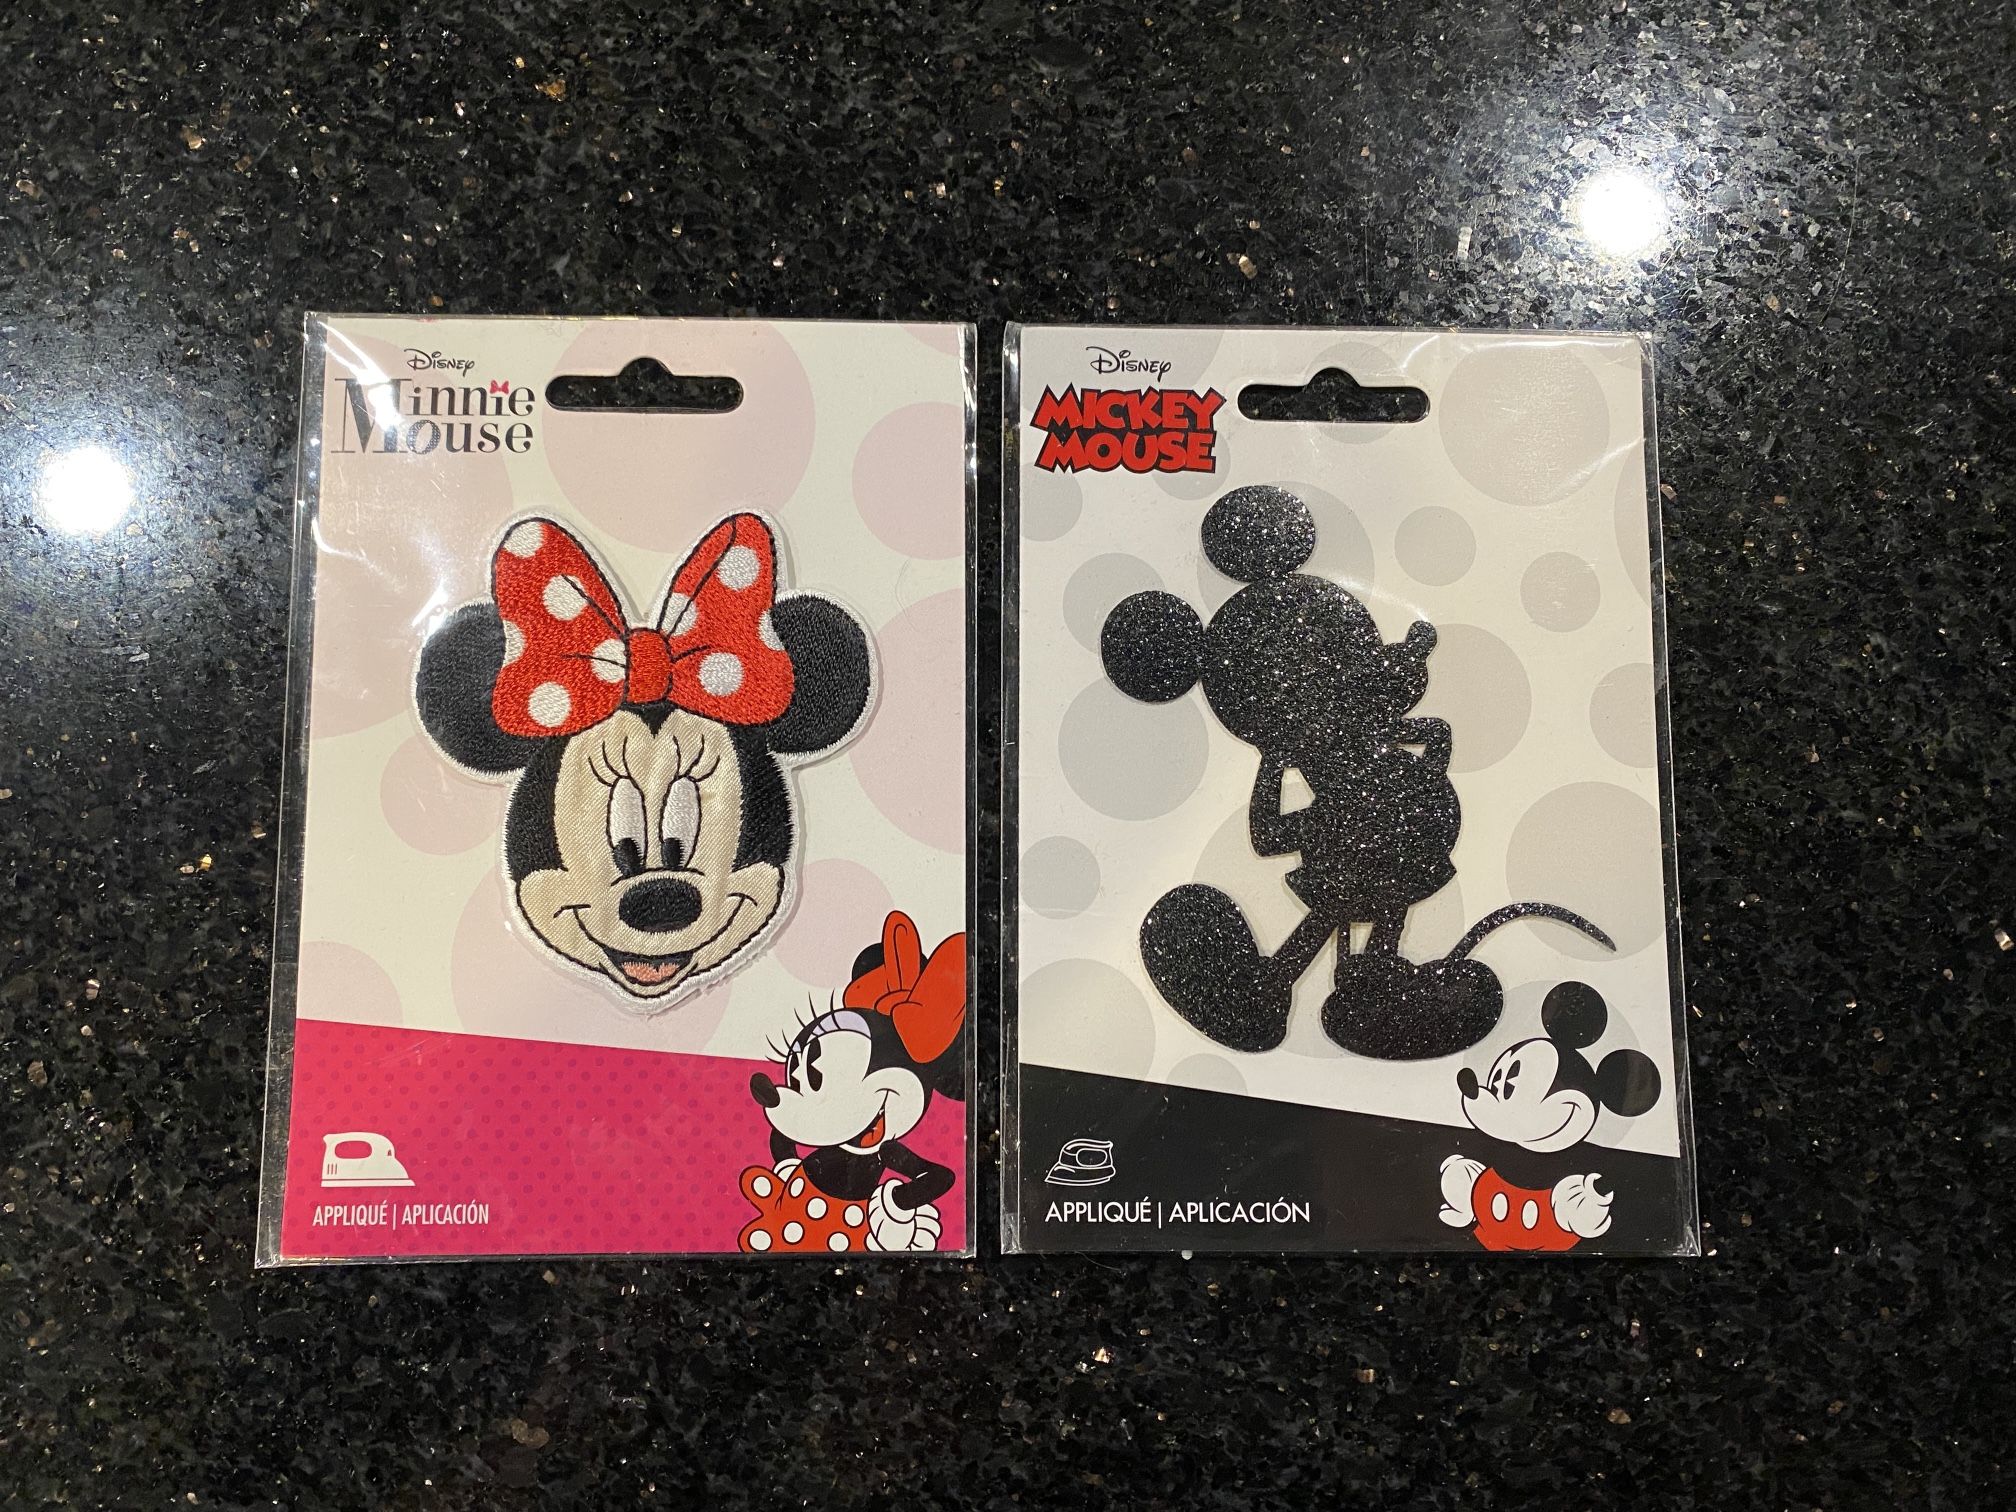 2 Disney Iron-on Appliqué Patches Minnie Mouse 3x3”& Mickey Mouse 3x3.5”